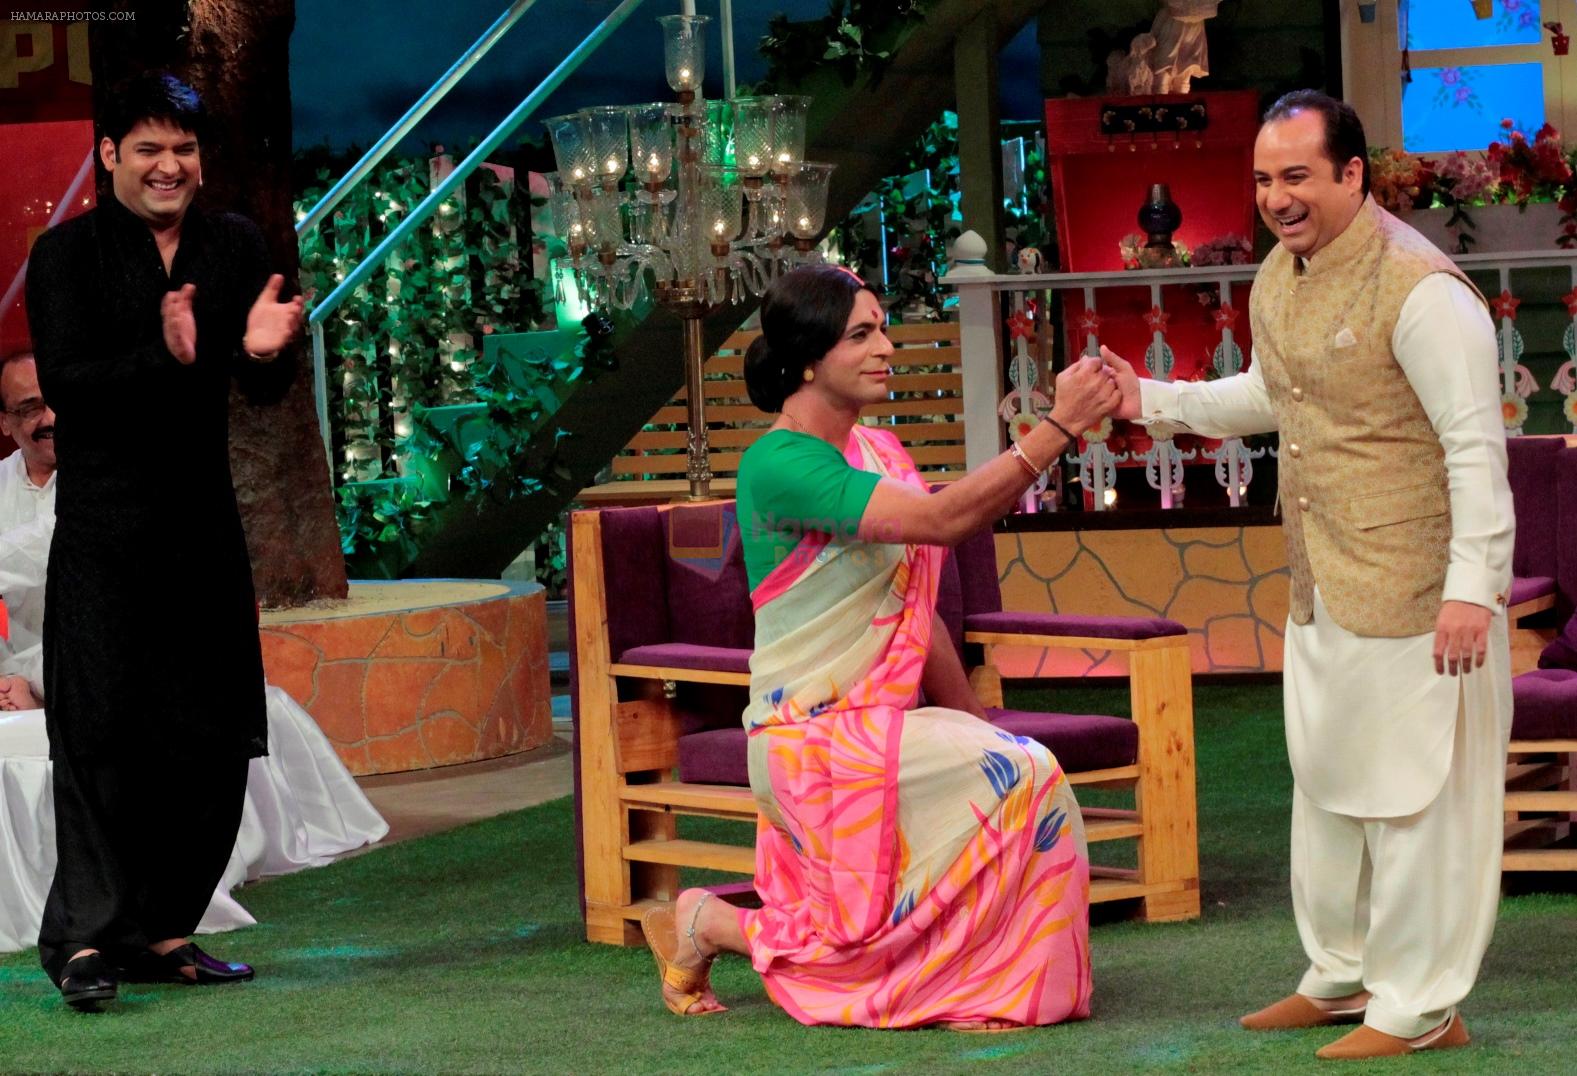 Rahat Fateh Ali Khan on The Kapil Sharma Show, The episode will be telecasted on Saturday on Sony Entertainment Television on 18th June 2016